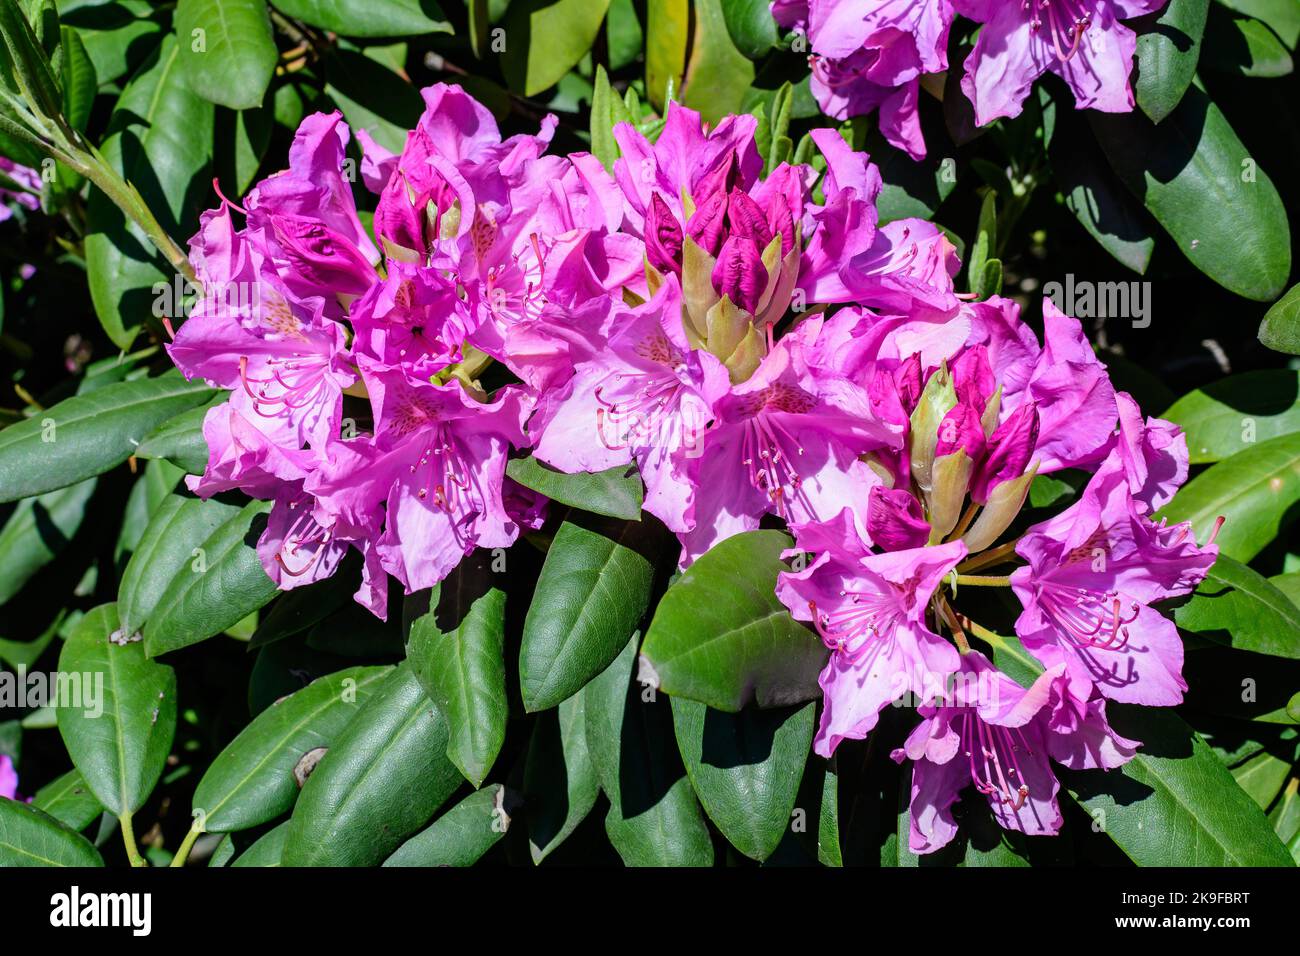 Bush of many delicate vivid pink flowers of azalea or Rhododendron plant in a sunny spring Scotish garden, beautiful outdoor floral background photogr Stock Photo